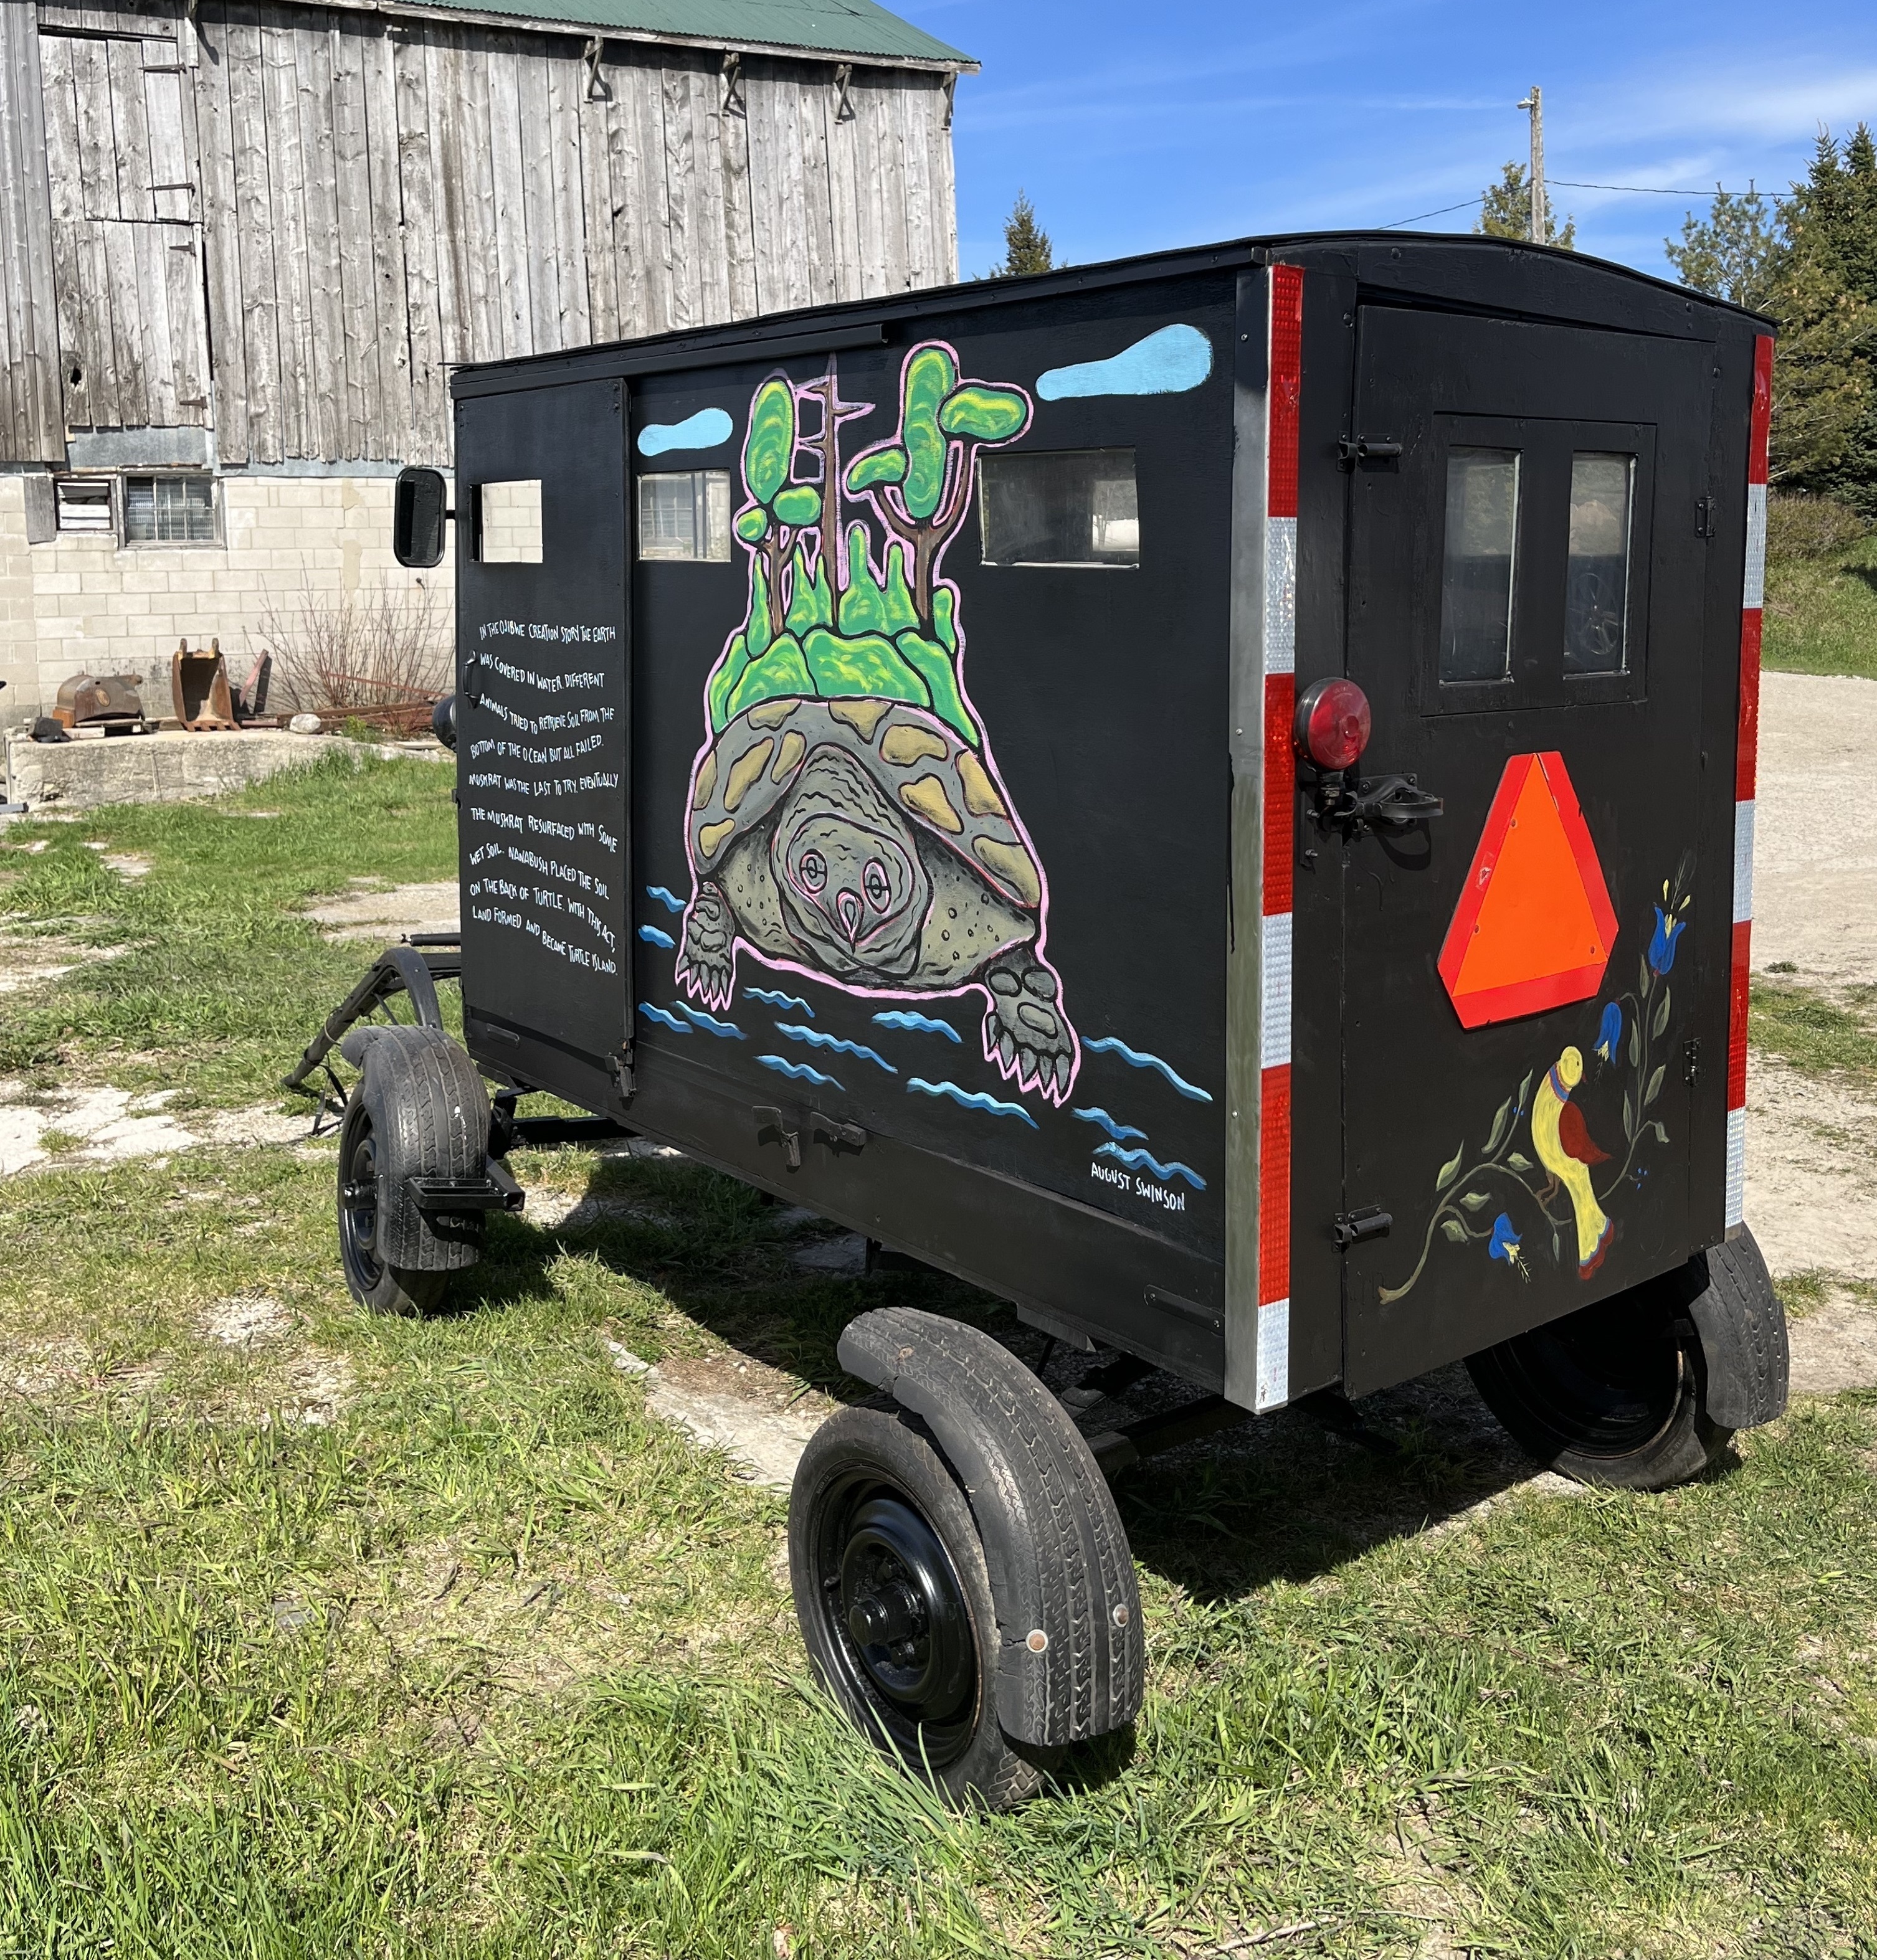 An Amish buggy that has been painted with a mural